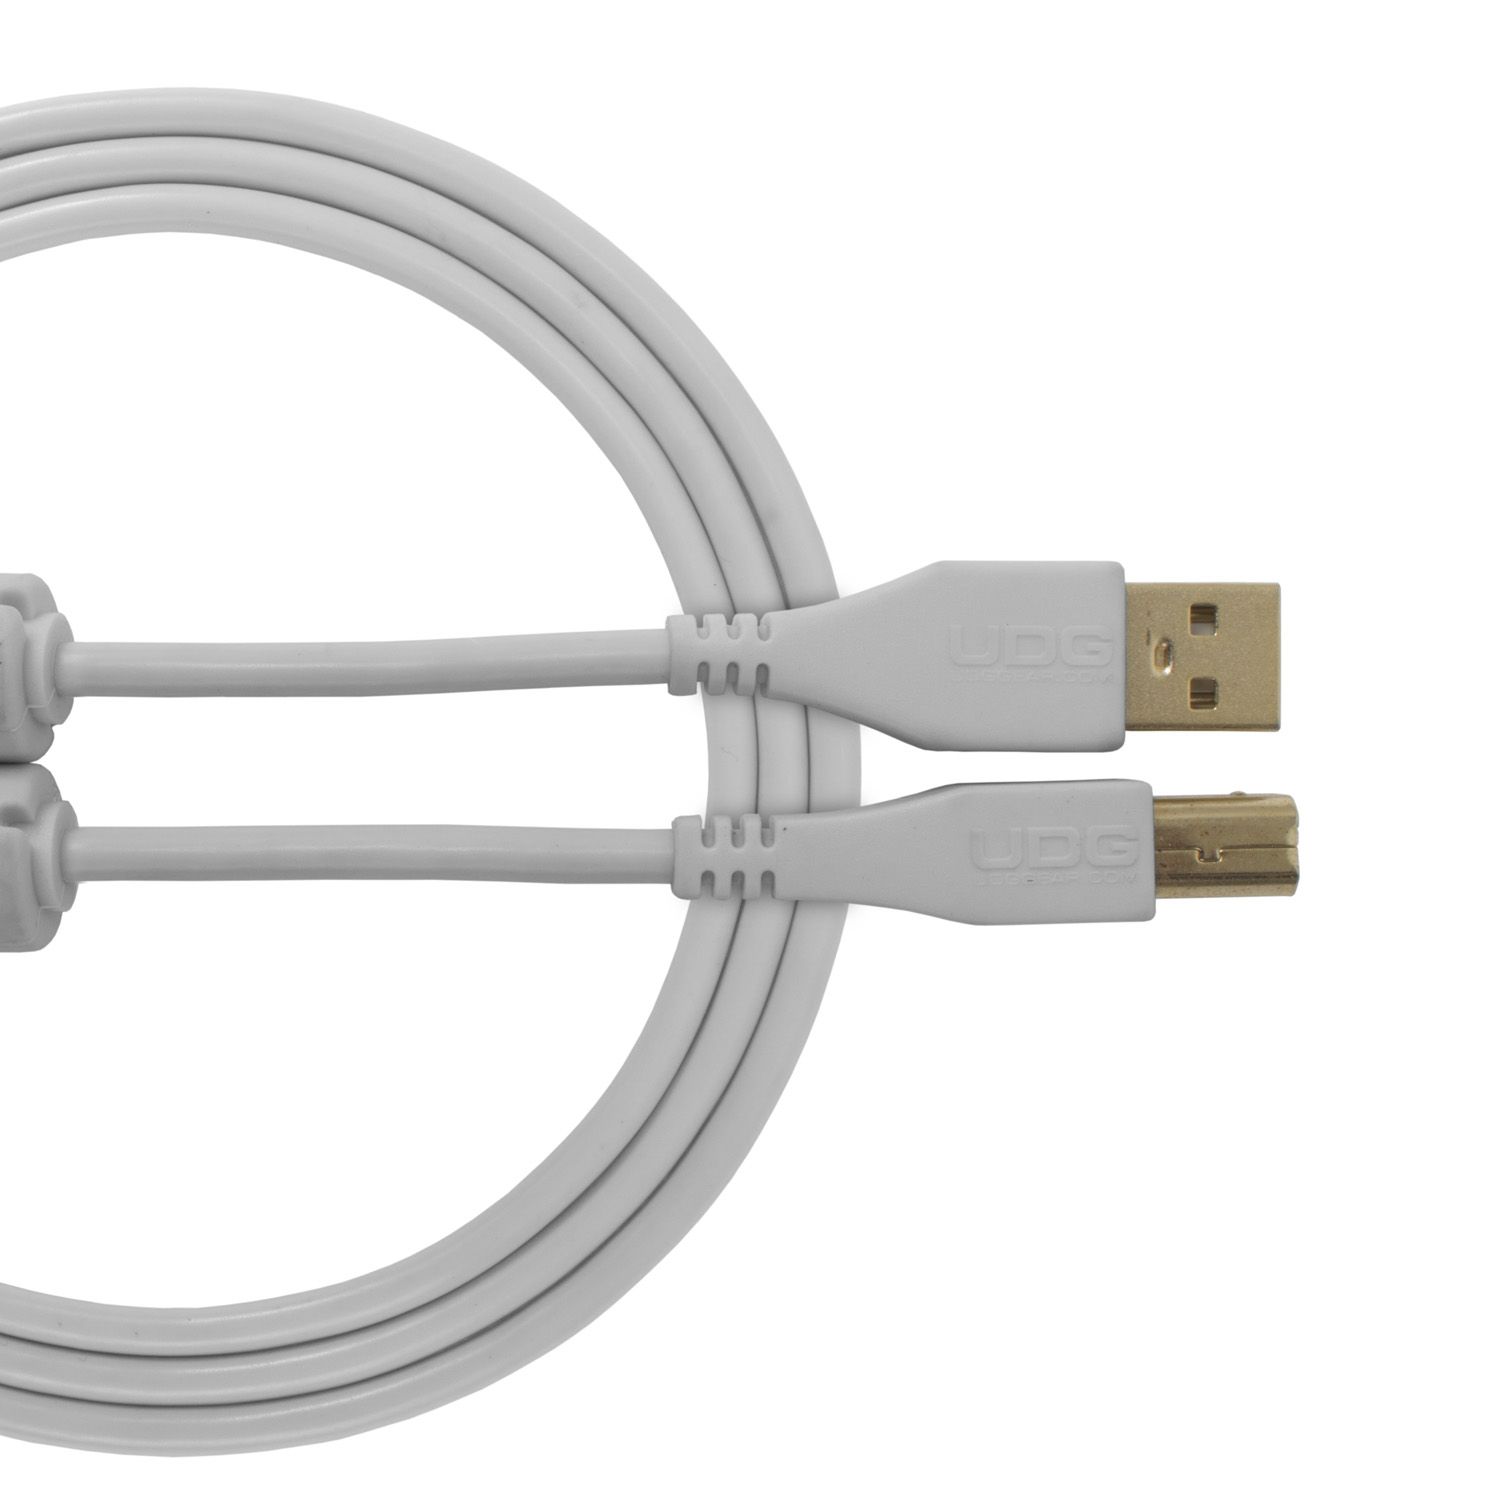 U95002WH UDG AUDIO CABLE USB 2.0 A-B WHITE STRA 2M